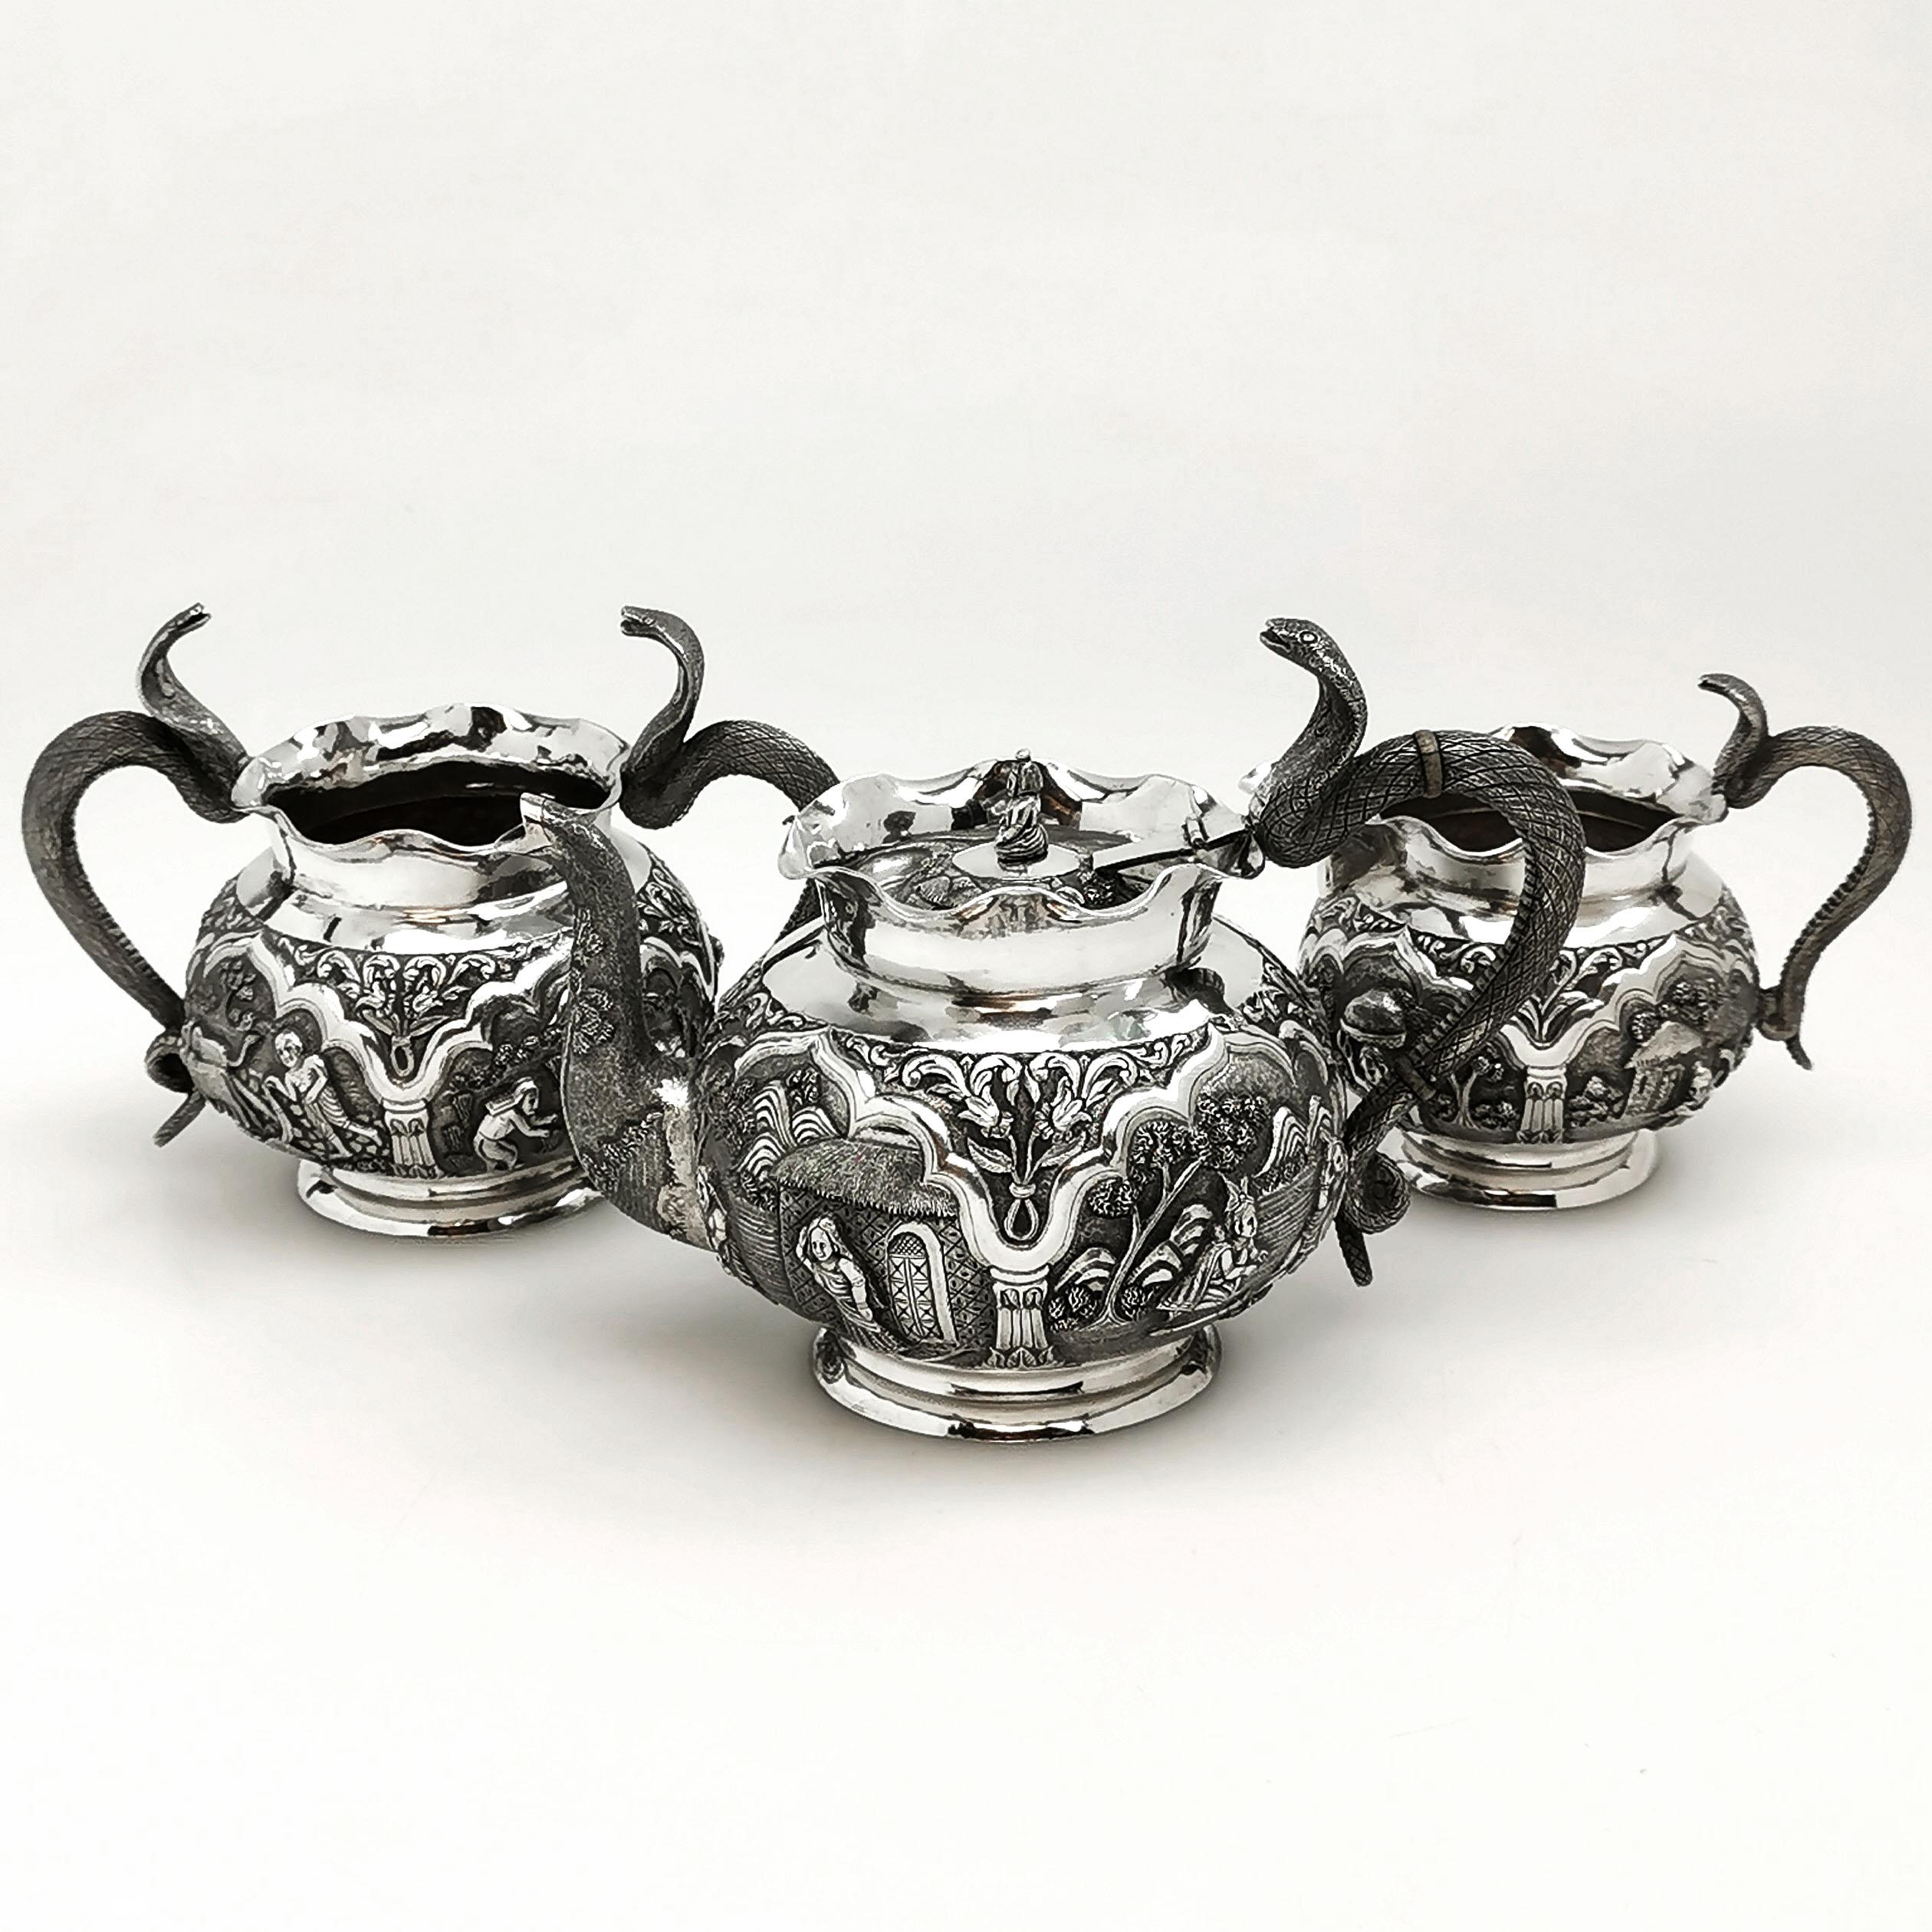 A magnificent antique Indian solid silver three-piece Tea Set comprising of a Teapot, a Milk / Cream Jug and a Sugar Bowl. Each piece features a gorgeous, detailed chased engraving around the body, and each has impressive Cobra Snake shaped handles.